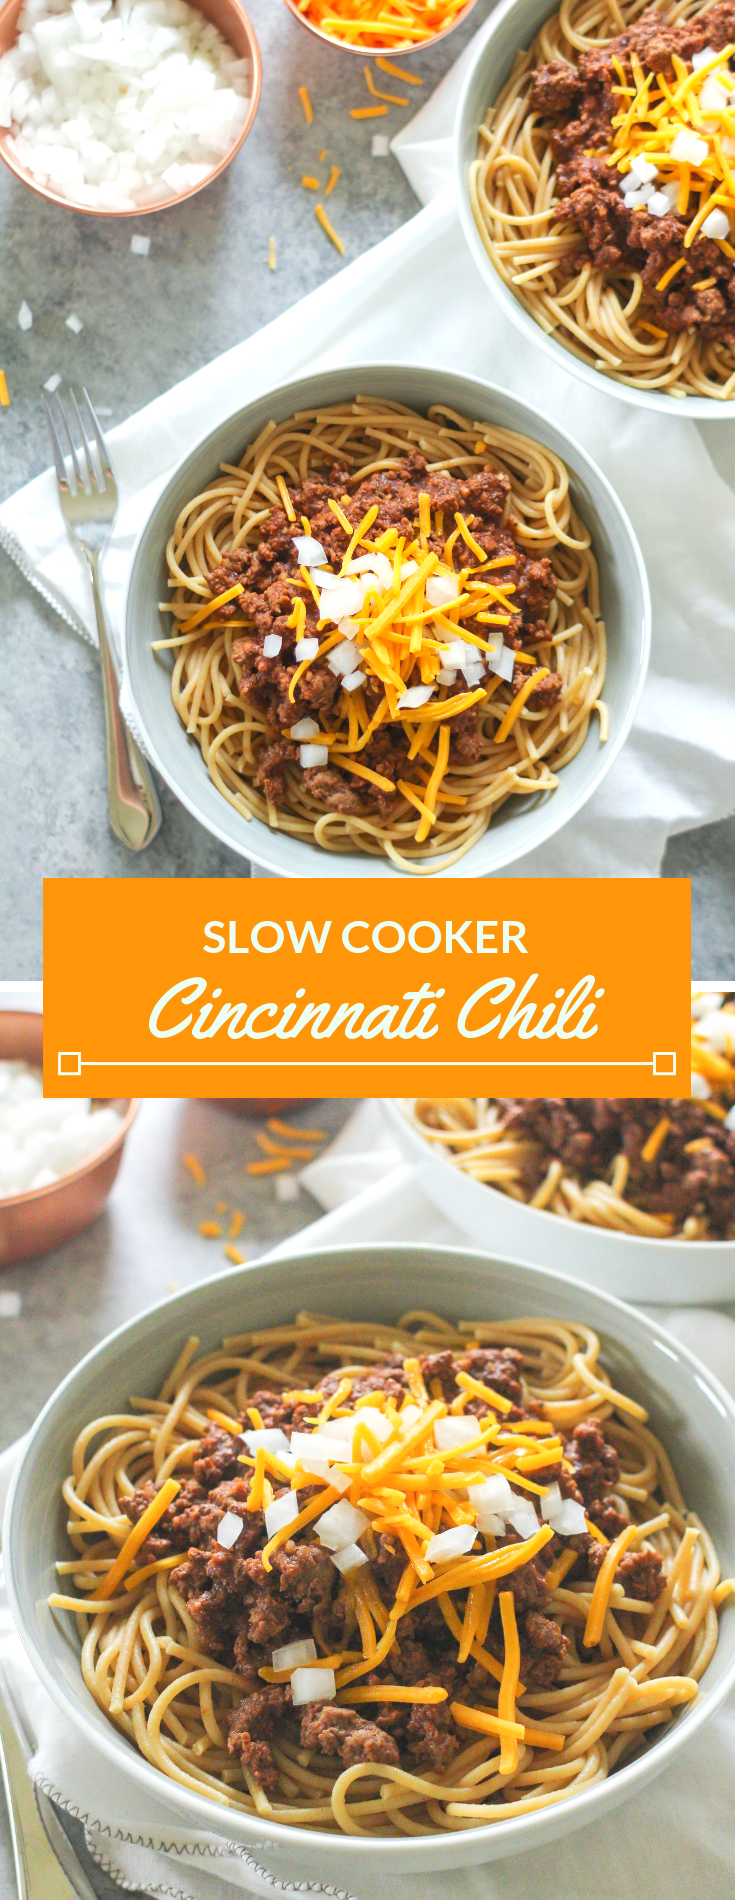 Famous in the Midwest, Cincinnati Chili is a Mediterranean spiced meat sauce used as a topping for spaghetti and garnished with cheddar cheese and white onion. 